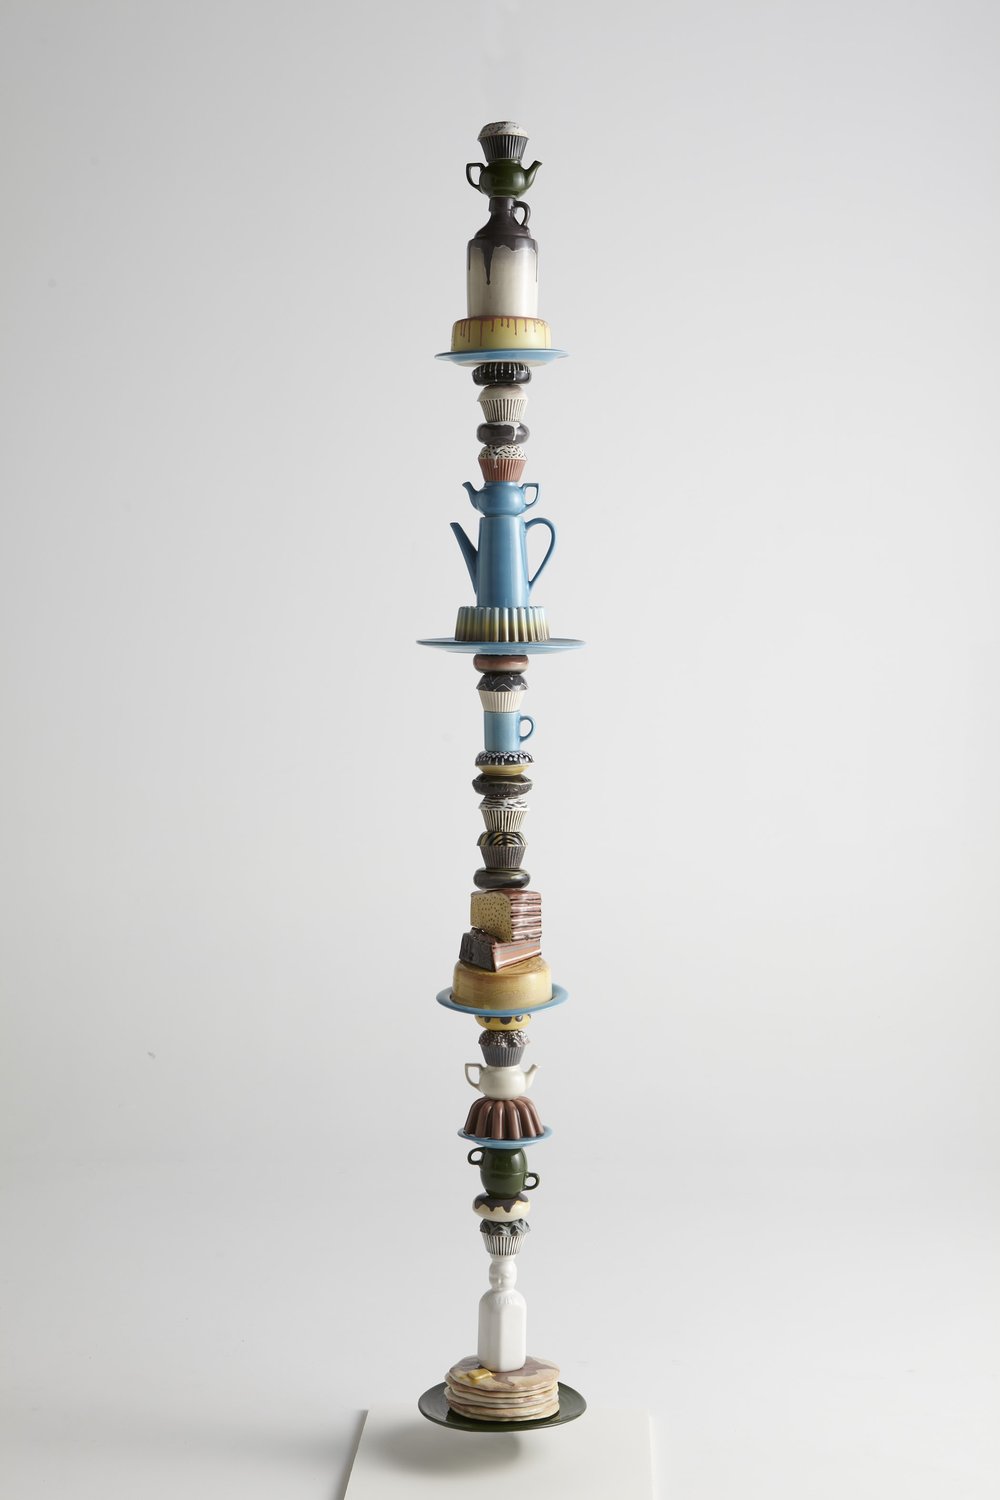 ‘Endless Column’ (slip cast vitreous china, 108 x 4-12 x 4-12 inches, 2013) by Justin Richel *collection of Kohler Co.